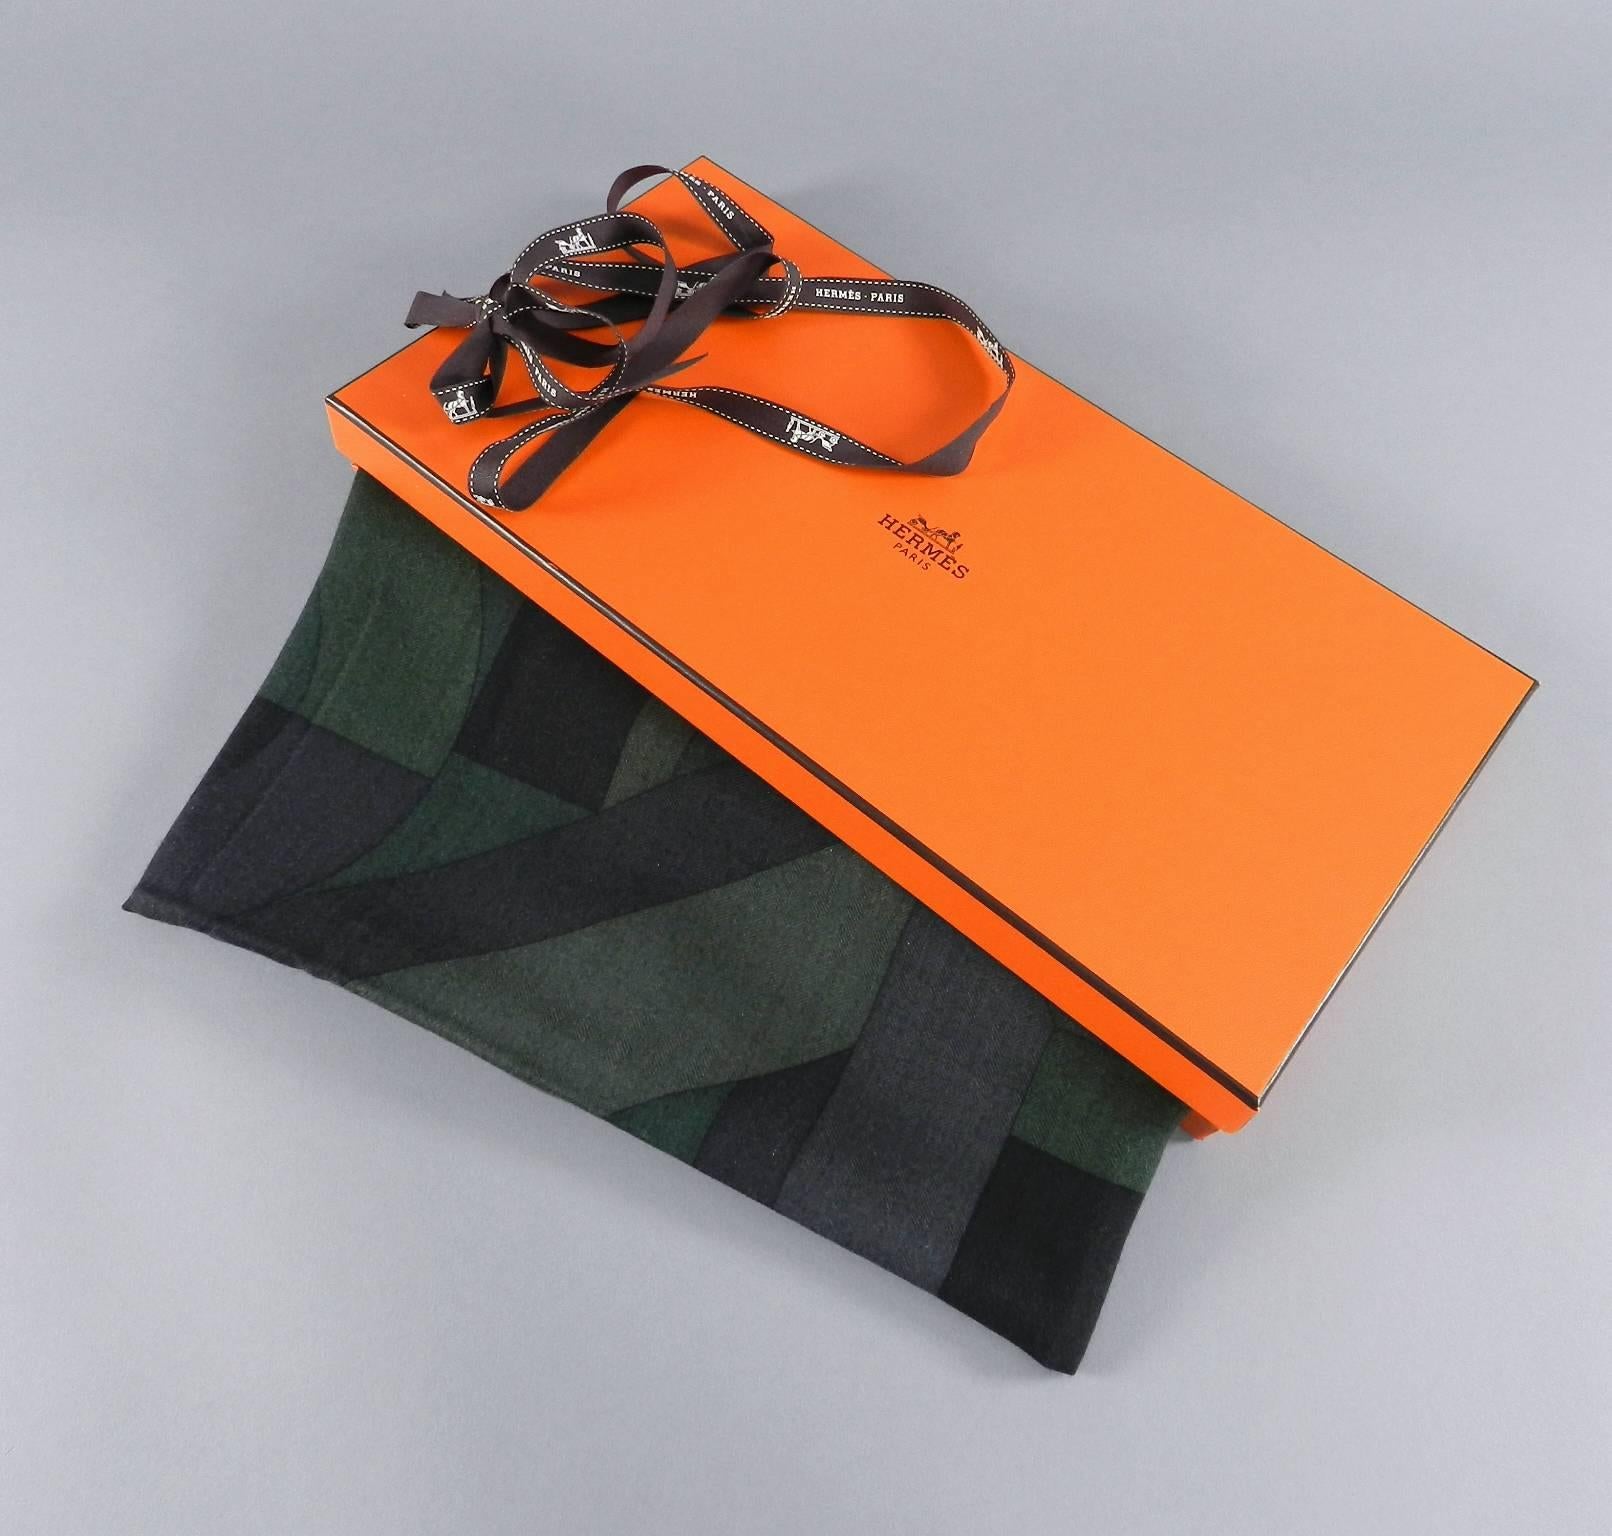 Hermes cashmere and silk scarf 39 x 39”. Perspecitve Cavaliere design in dark forest green tones. Original box and tag attached.  Unworn.

We ship worldwide.
